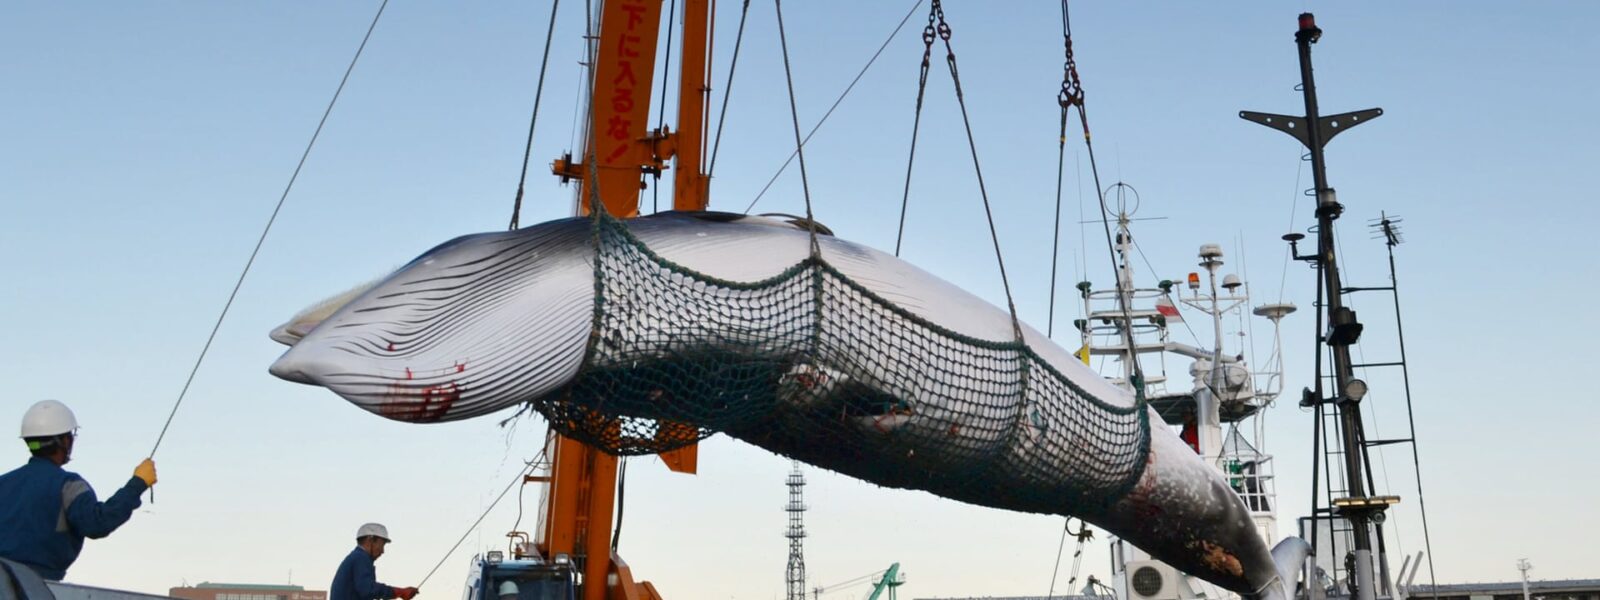 The Truth about Whaling - International Marine Mammal Project